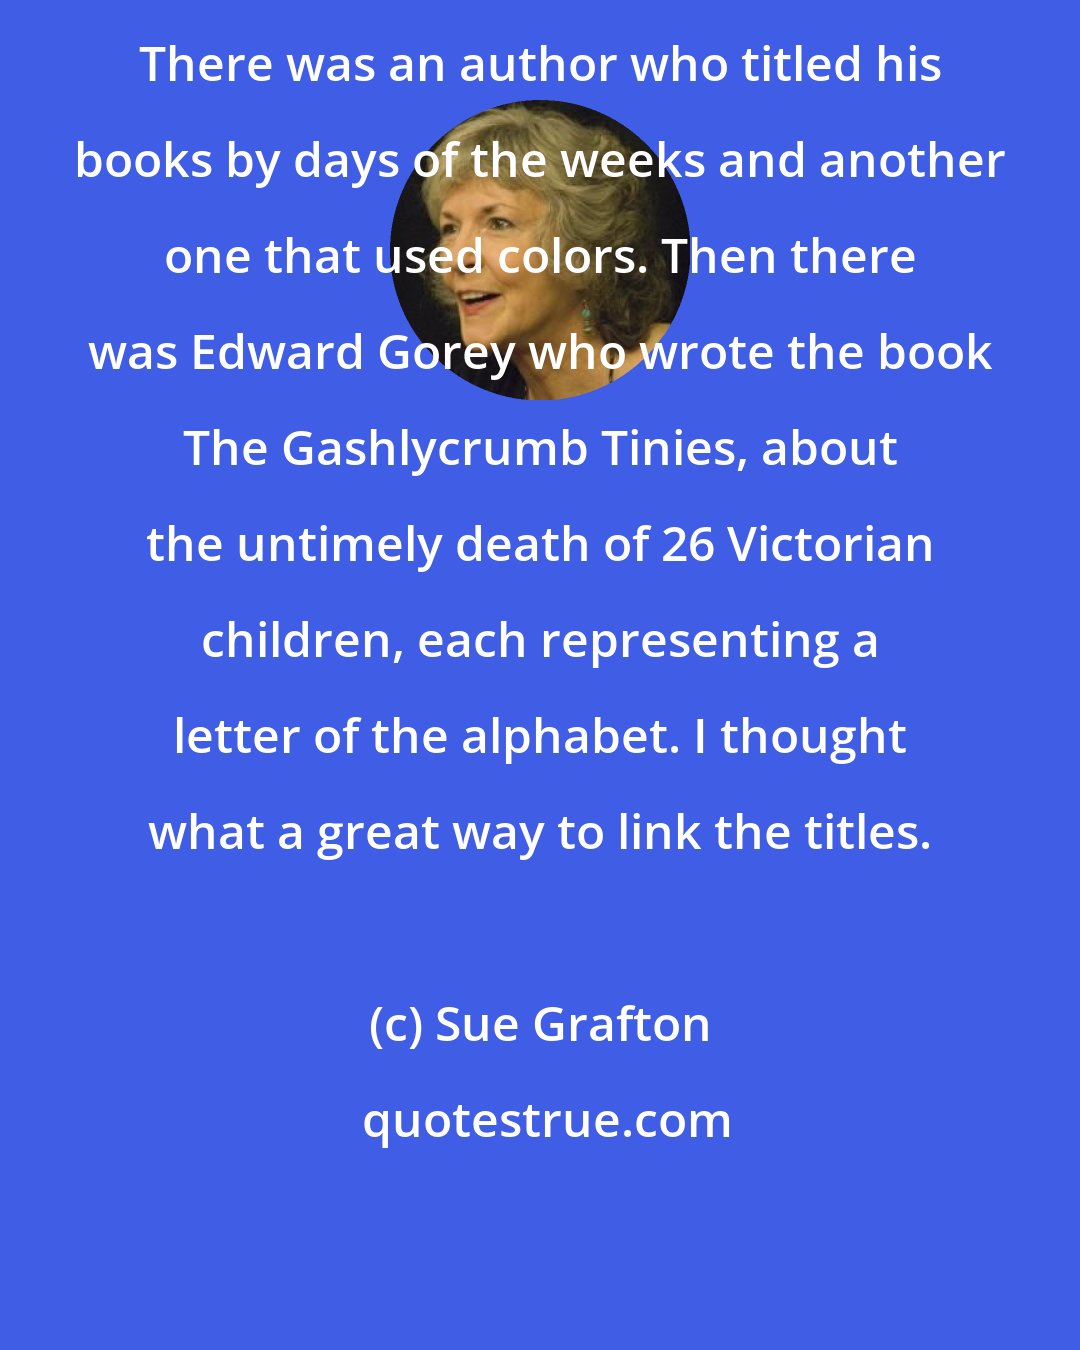 Sue Grafton: There was an author who titled his books by days of the weeks and another one that used colors. Then there was Edward Gorey who wrote the book The Gashlycrumb Tinies, about the untimely death of 26 Victorian children, each representing a letter of the alphabet. I thought what a great way to link the titles.